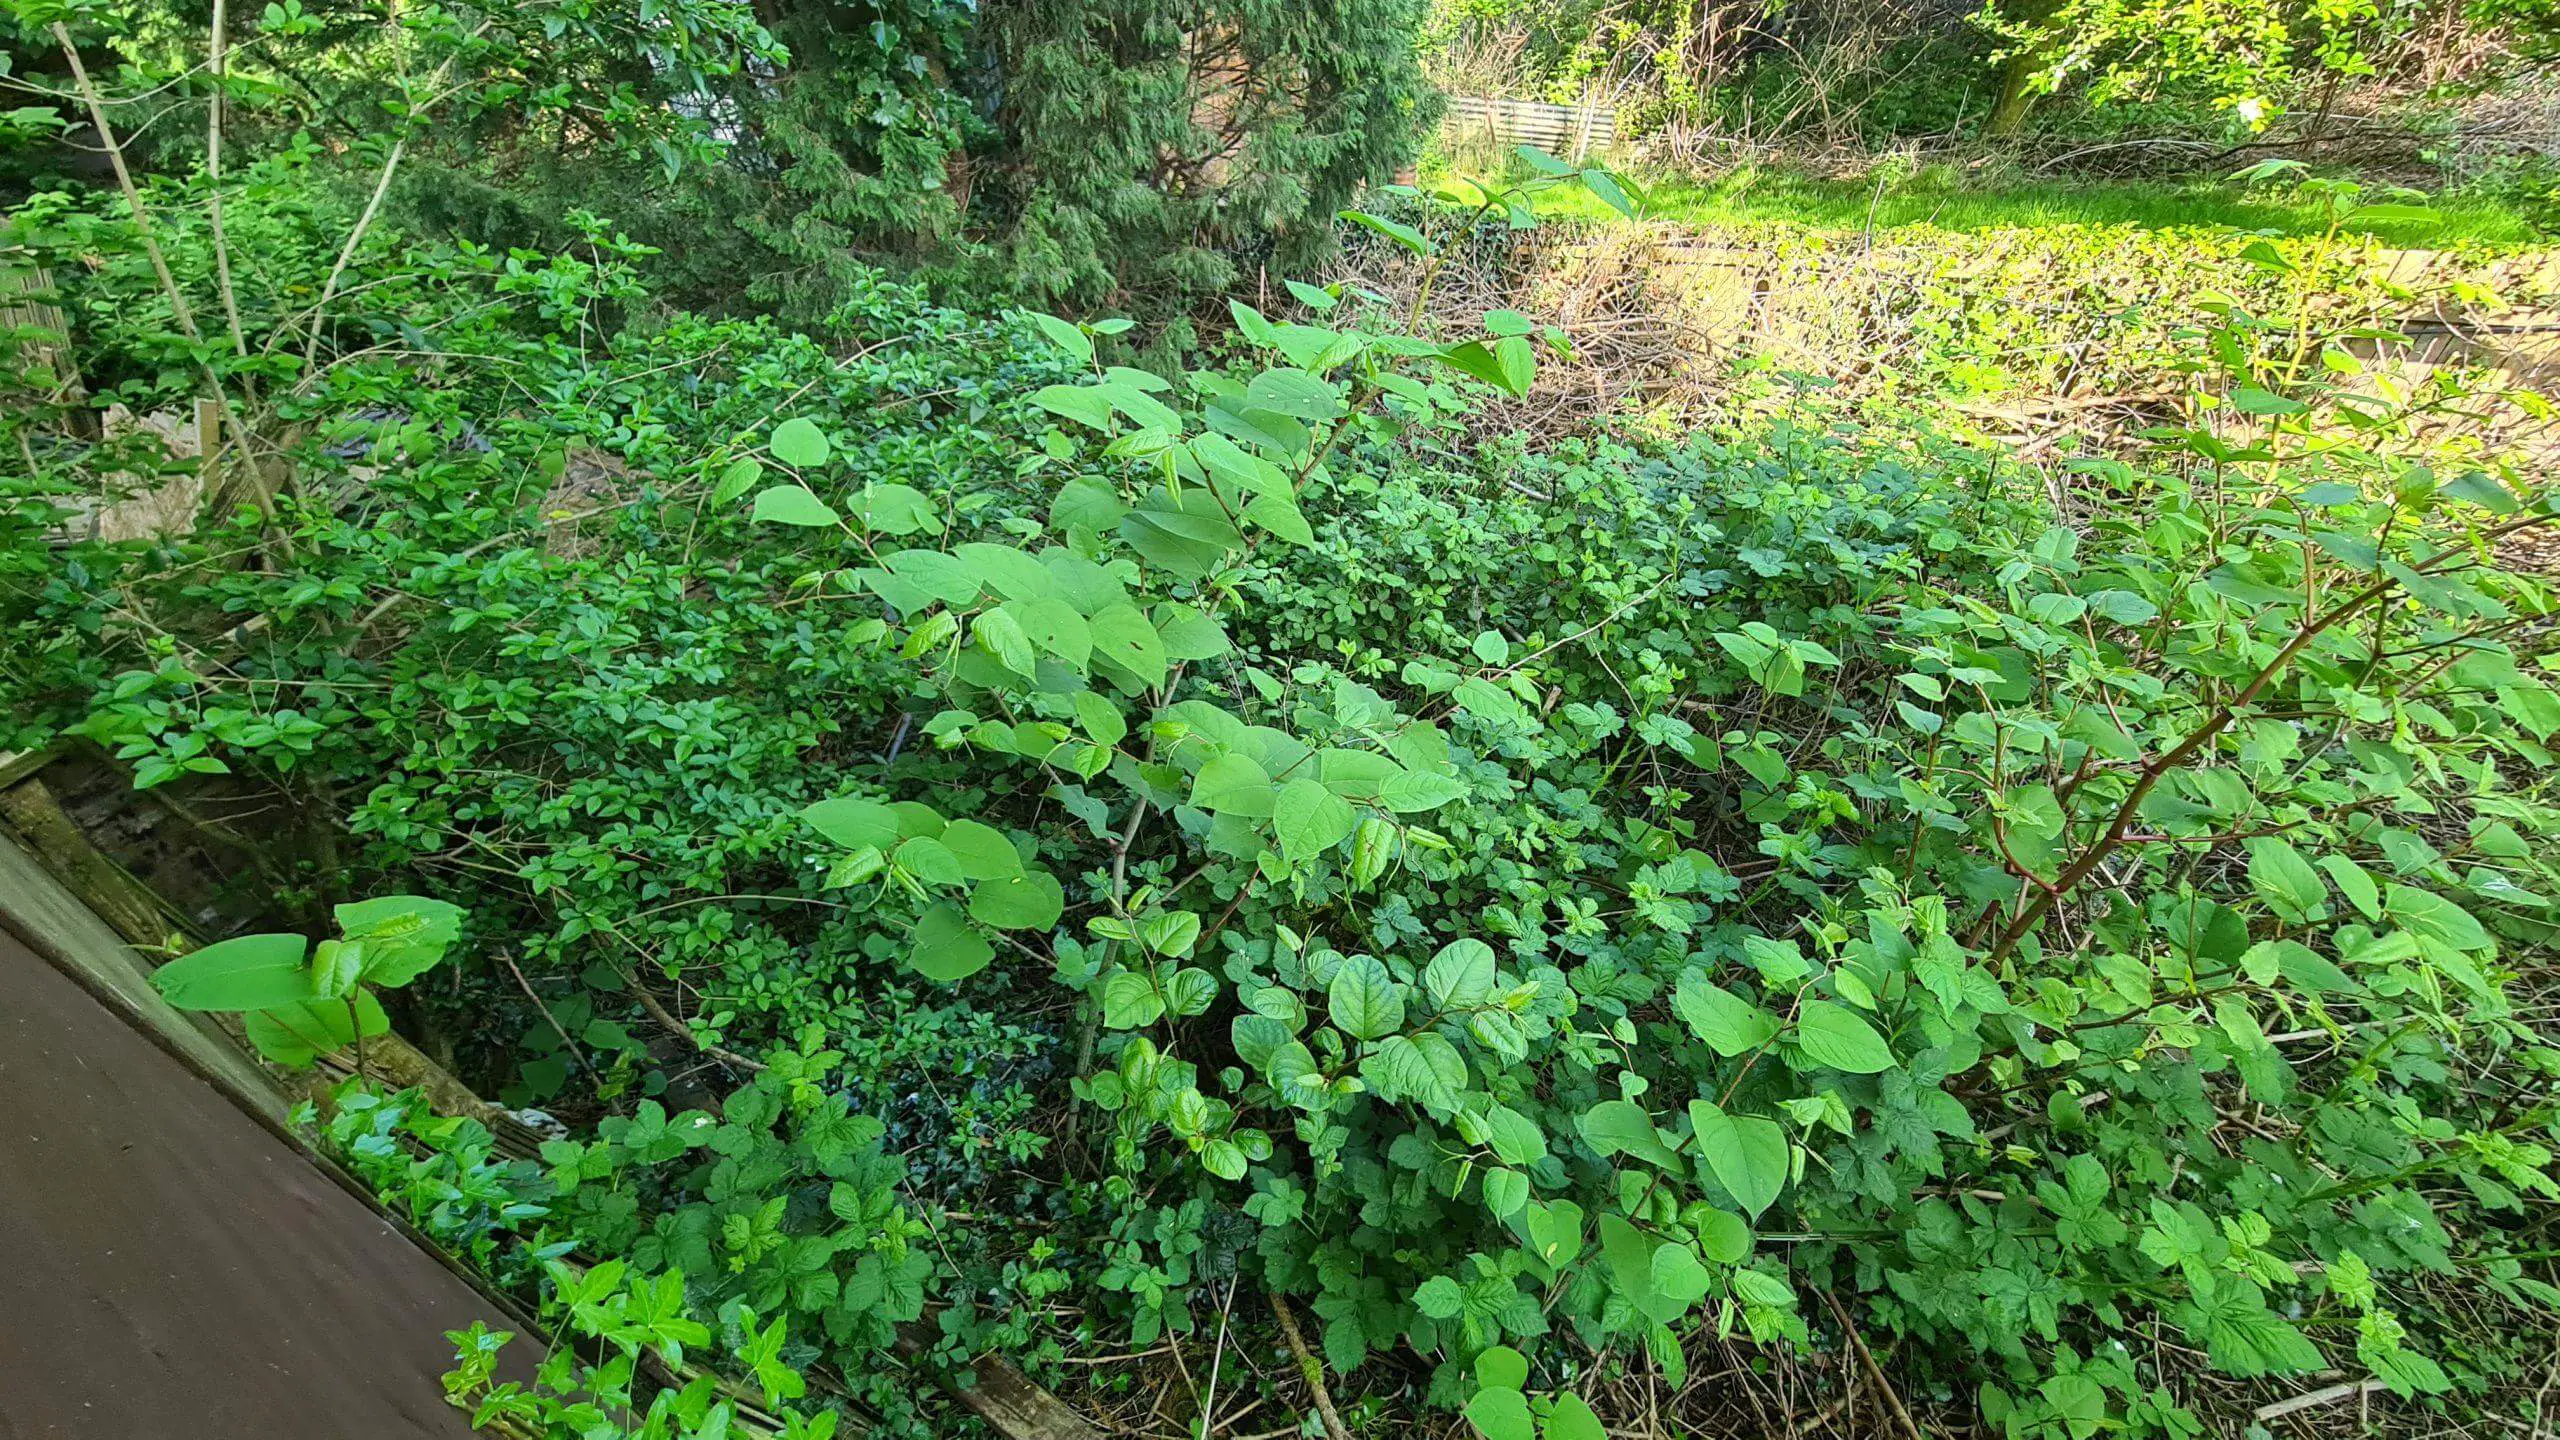 There are many factors affecting the removal of Japanese knotweed that need to be considered to keep costs affordable